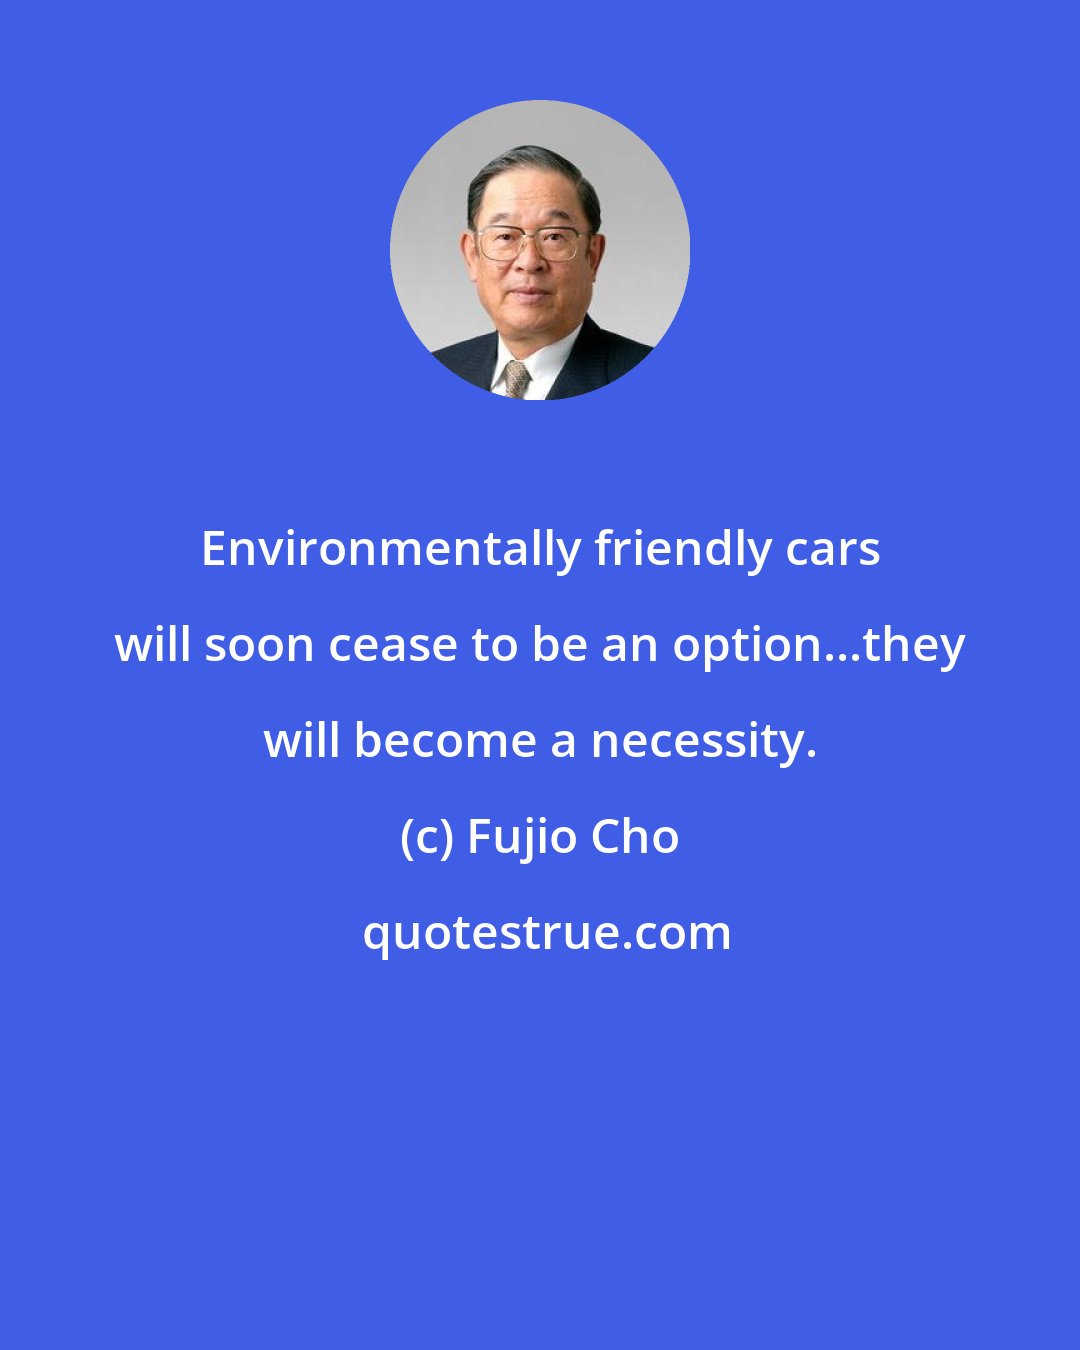 Fujio Cho: Environmentally friendly cars will soon cease to be an option...they will become a necessity.